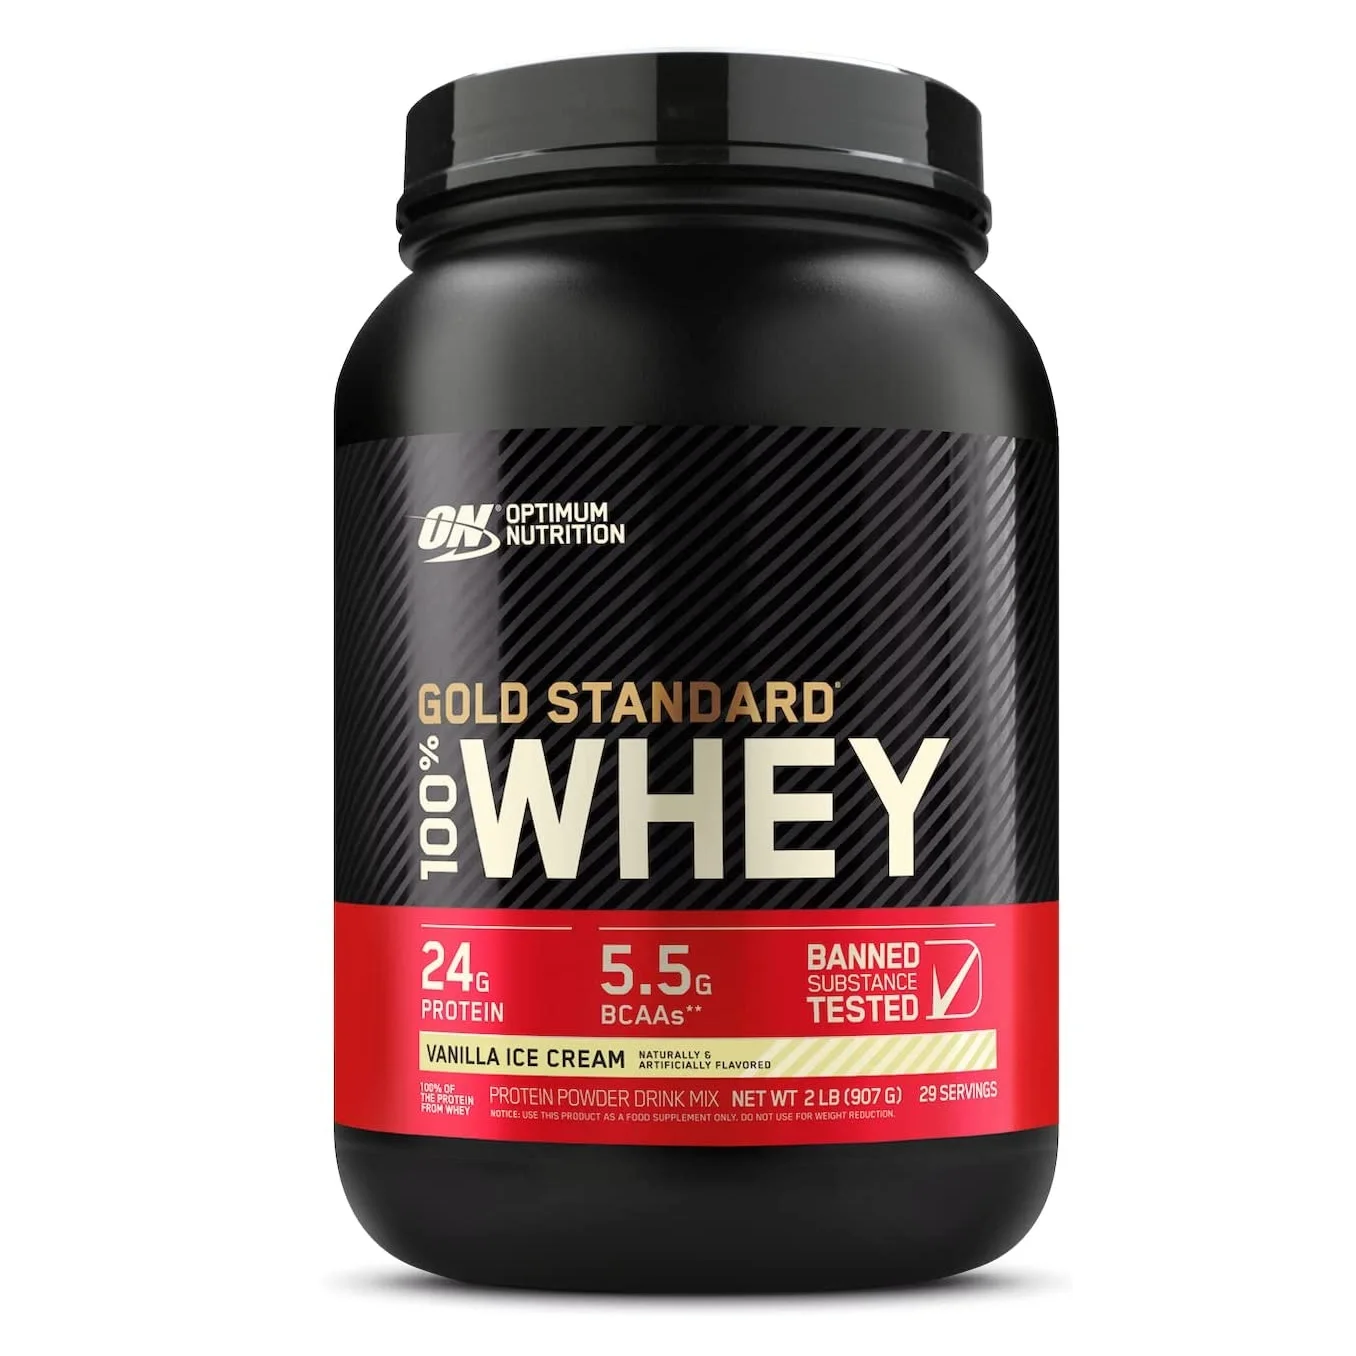 Wholesale Supplier Of Bulk Stock of Whey Protein Powder / Whey Protein Isolate Fast Shipping